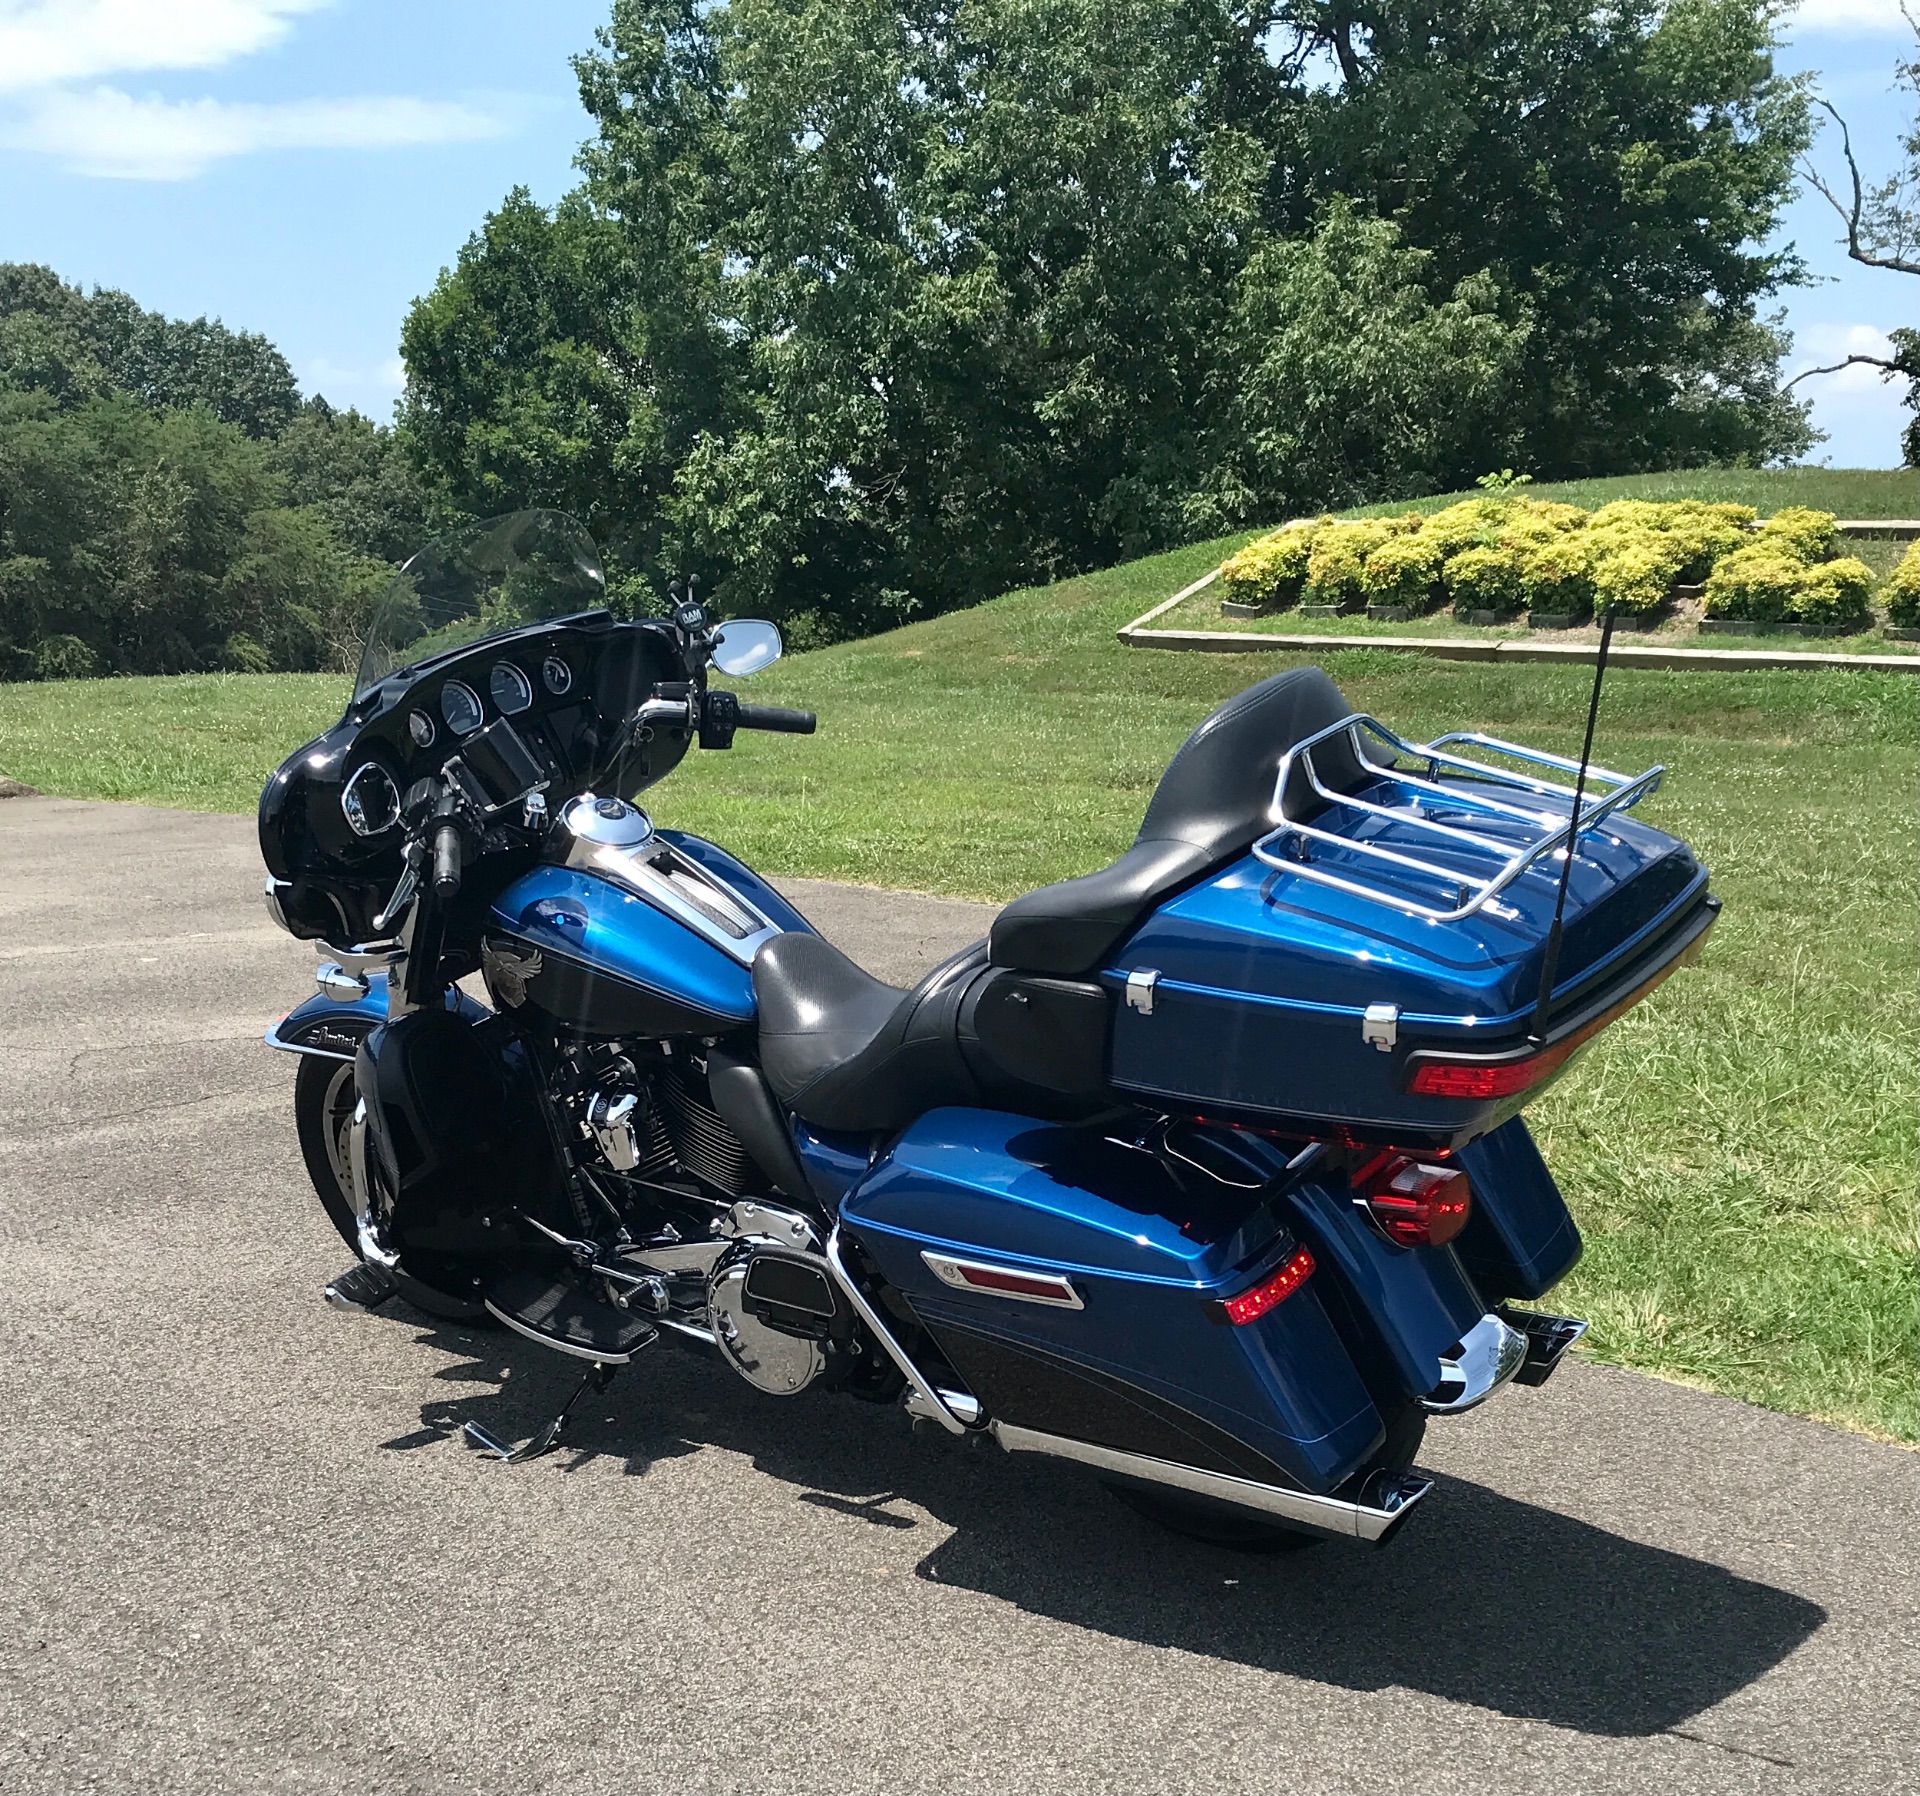 2018 Harley-Davidson Electra Glide Ultra Limited in Morristown, Tennessee - Photo 7